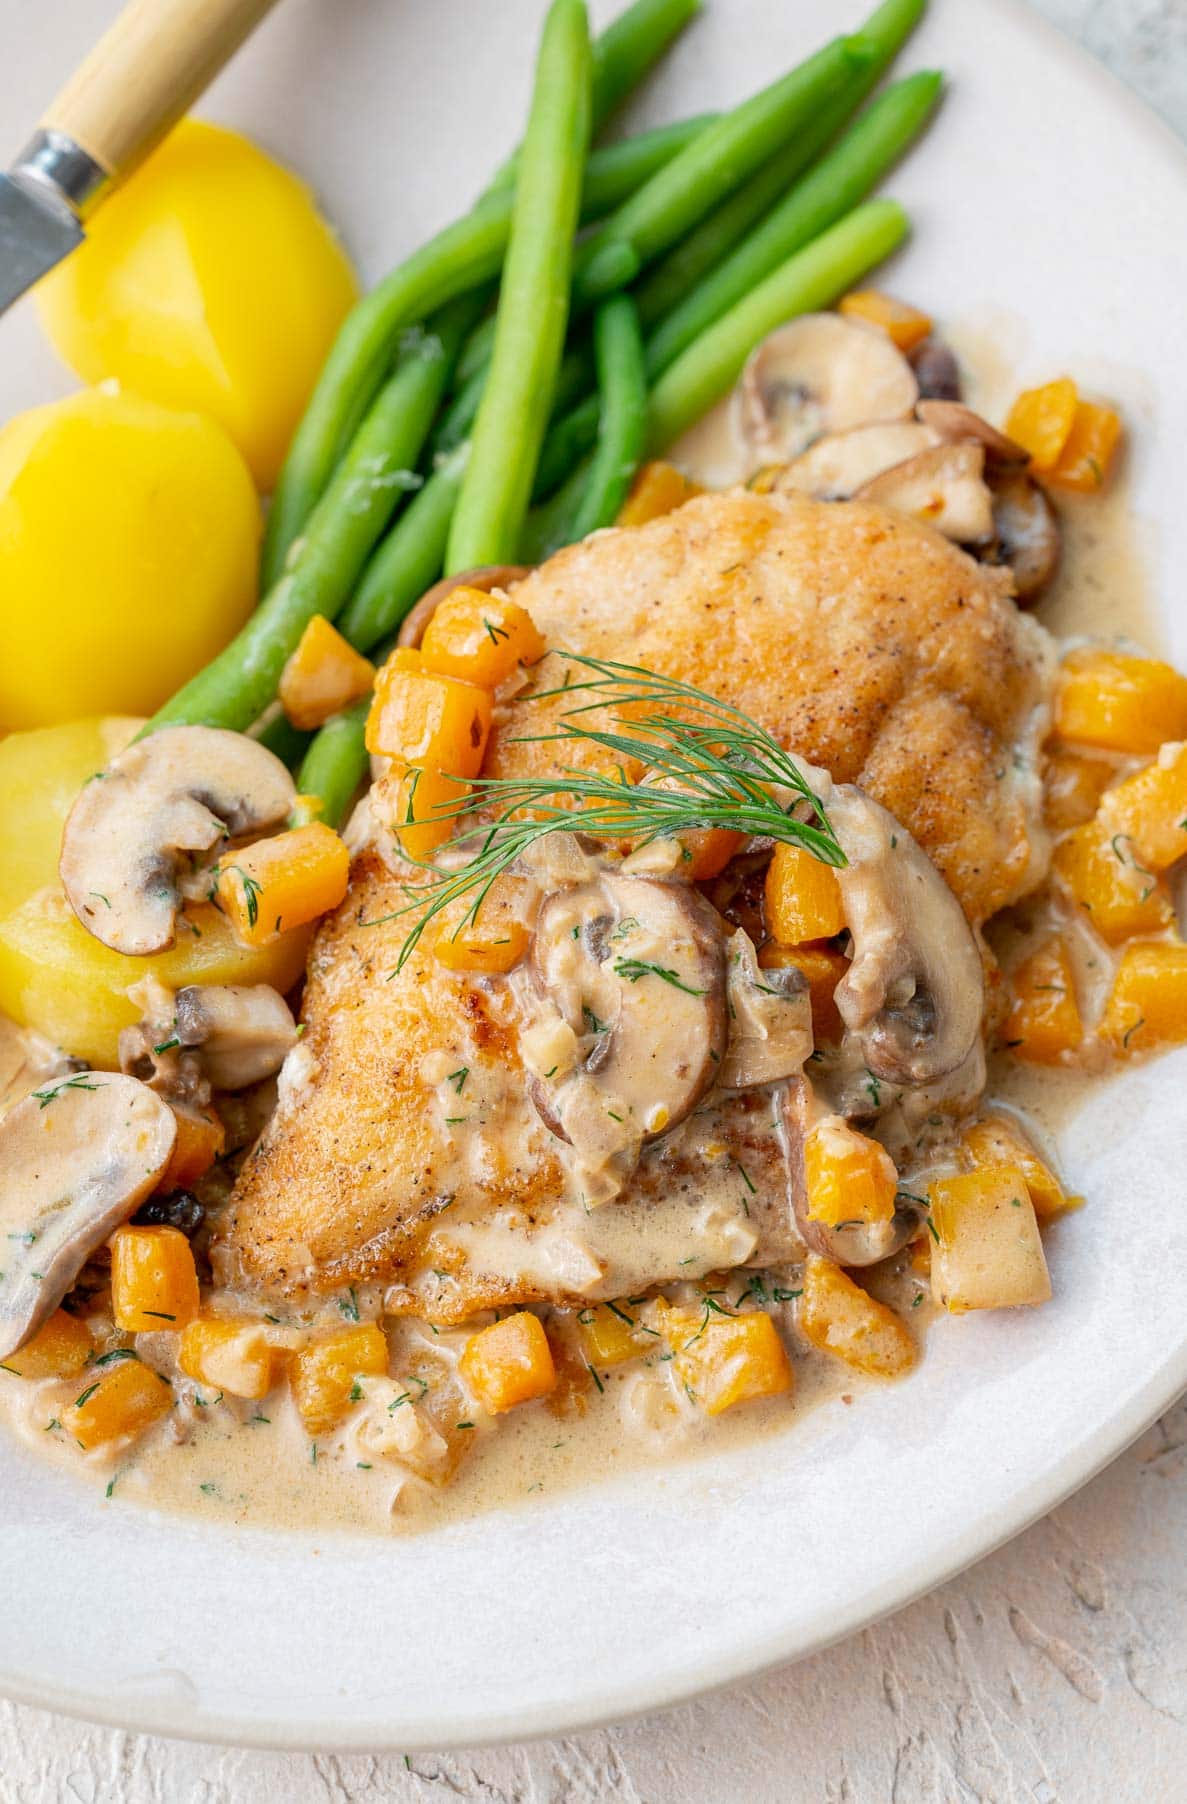 Chicken with Creamy Butternut Squash and Mushroom Sauce on a beige plate served with green beans and potatoes.